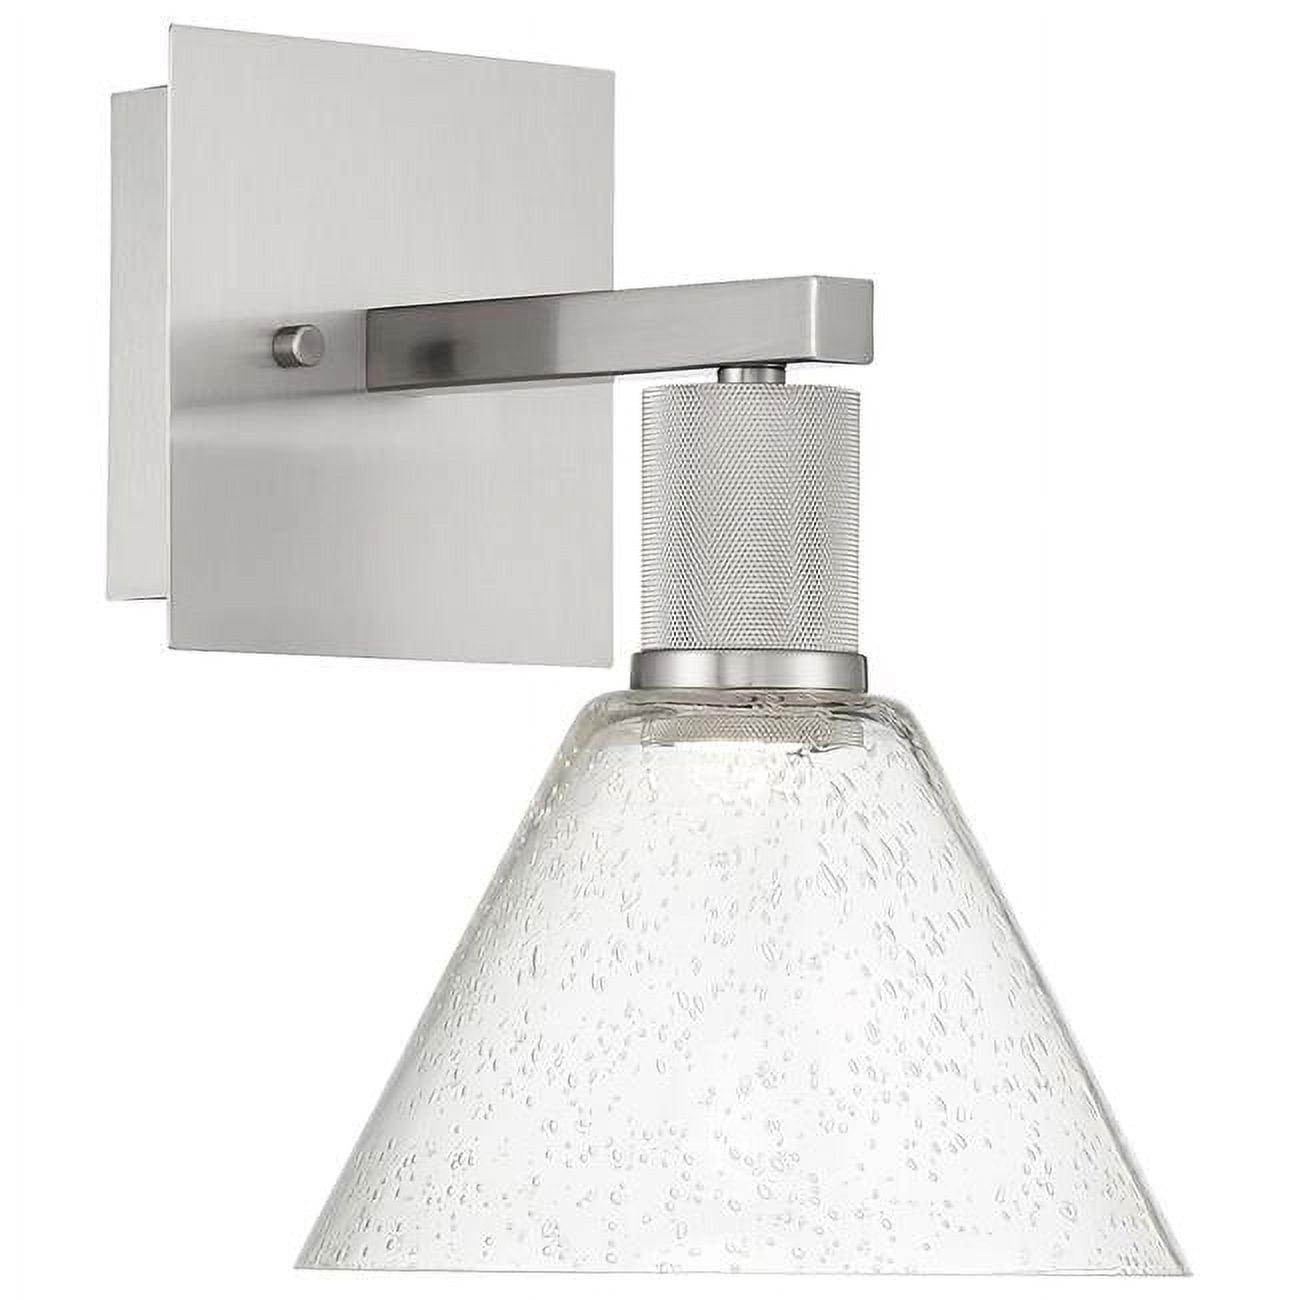 Picture of Access Lighting 63143LEDD-BS-SDG Port 9 Martini LED Wall Sconce in Brushed Steel